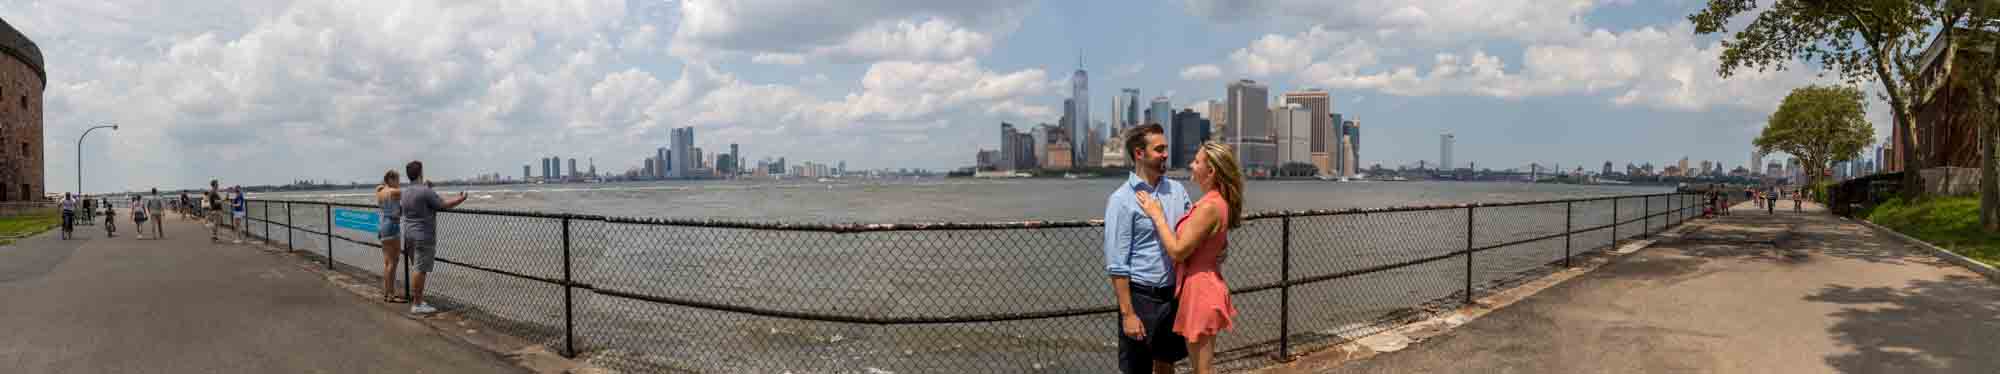 Panoramic view of couple in front of NYC skyline